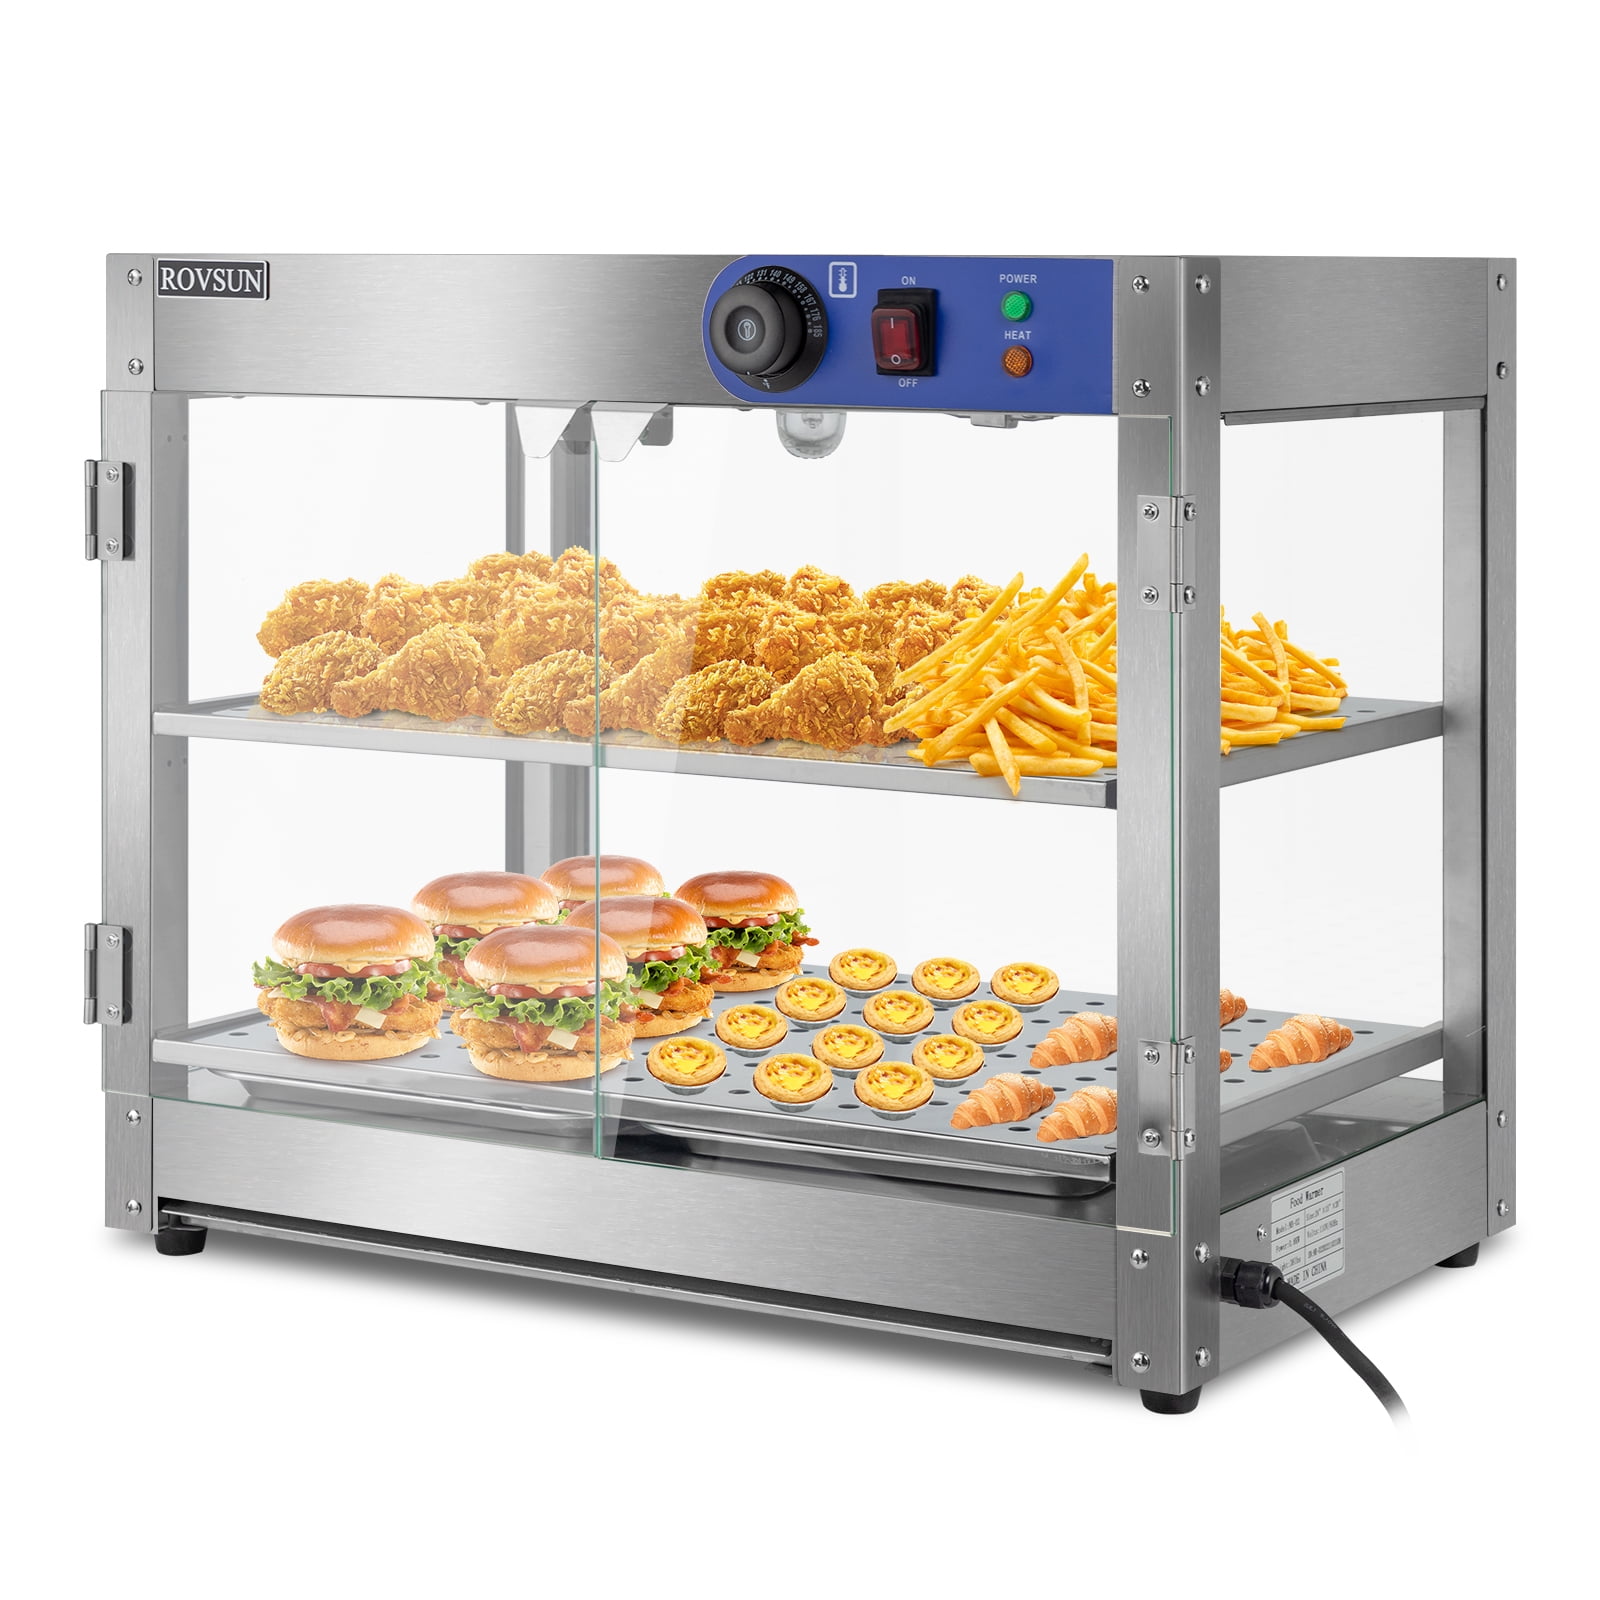 Electric Hot Food Case/Food Warmer Display Commercial Food Warming